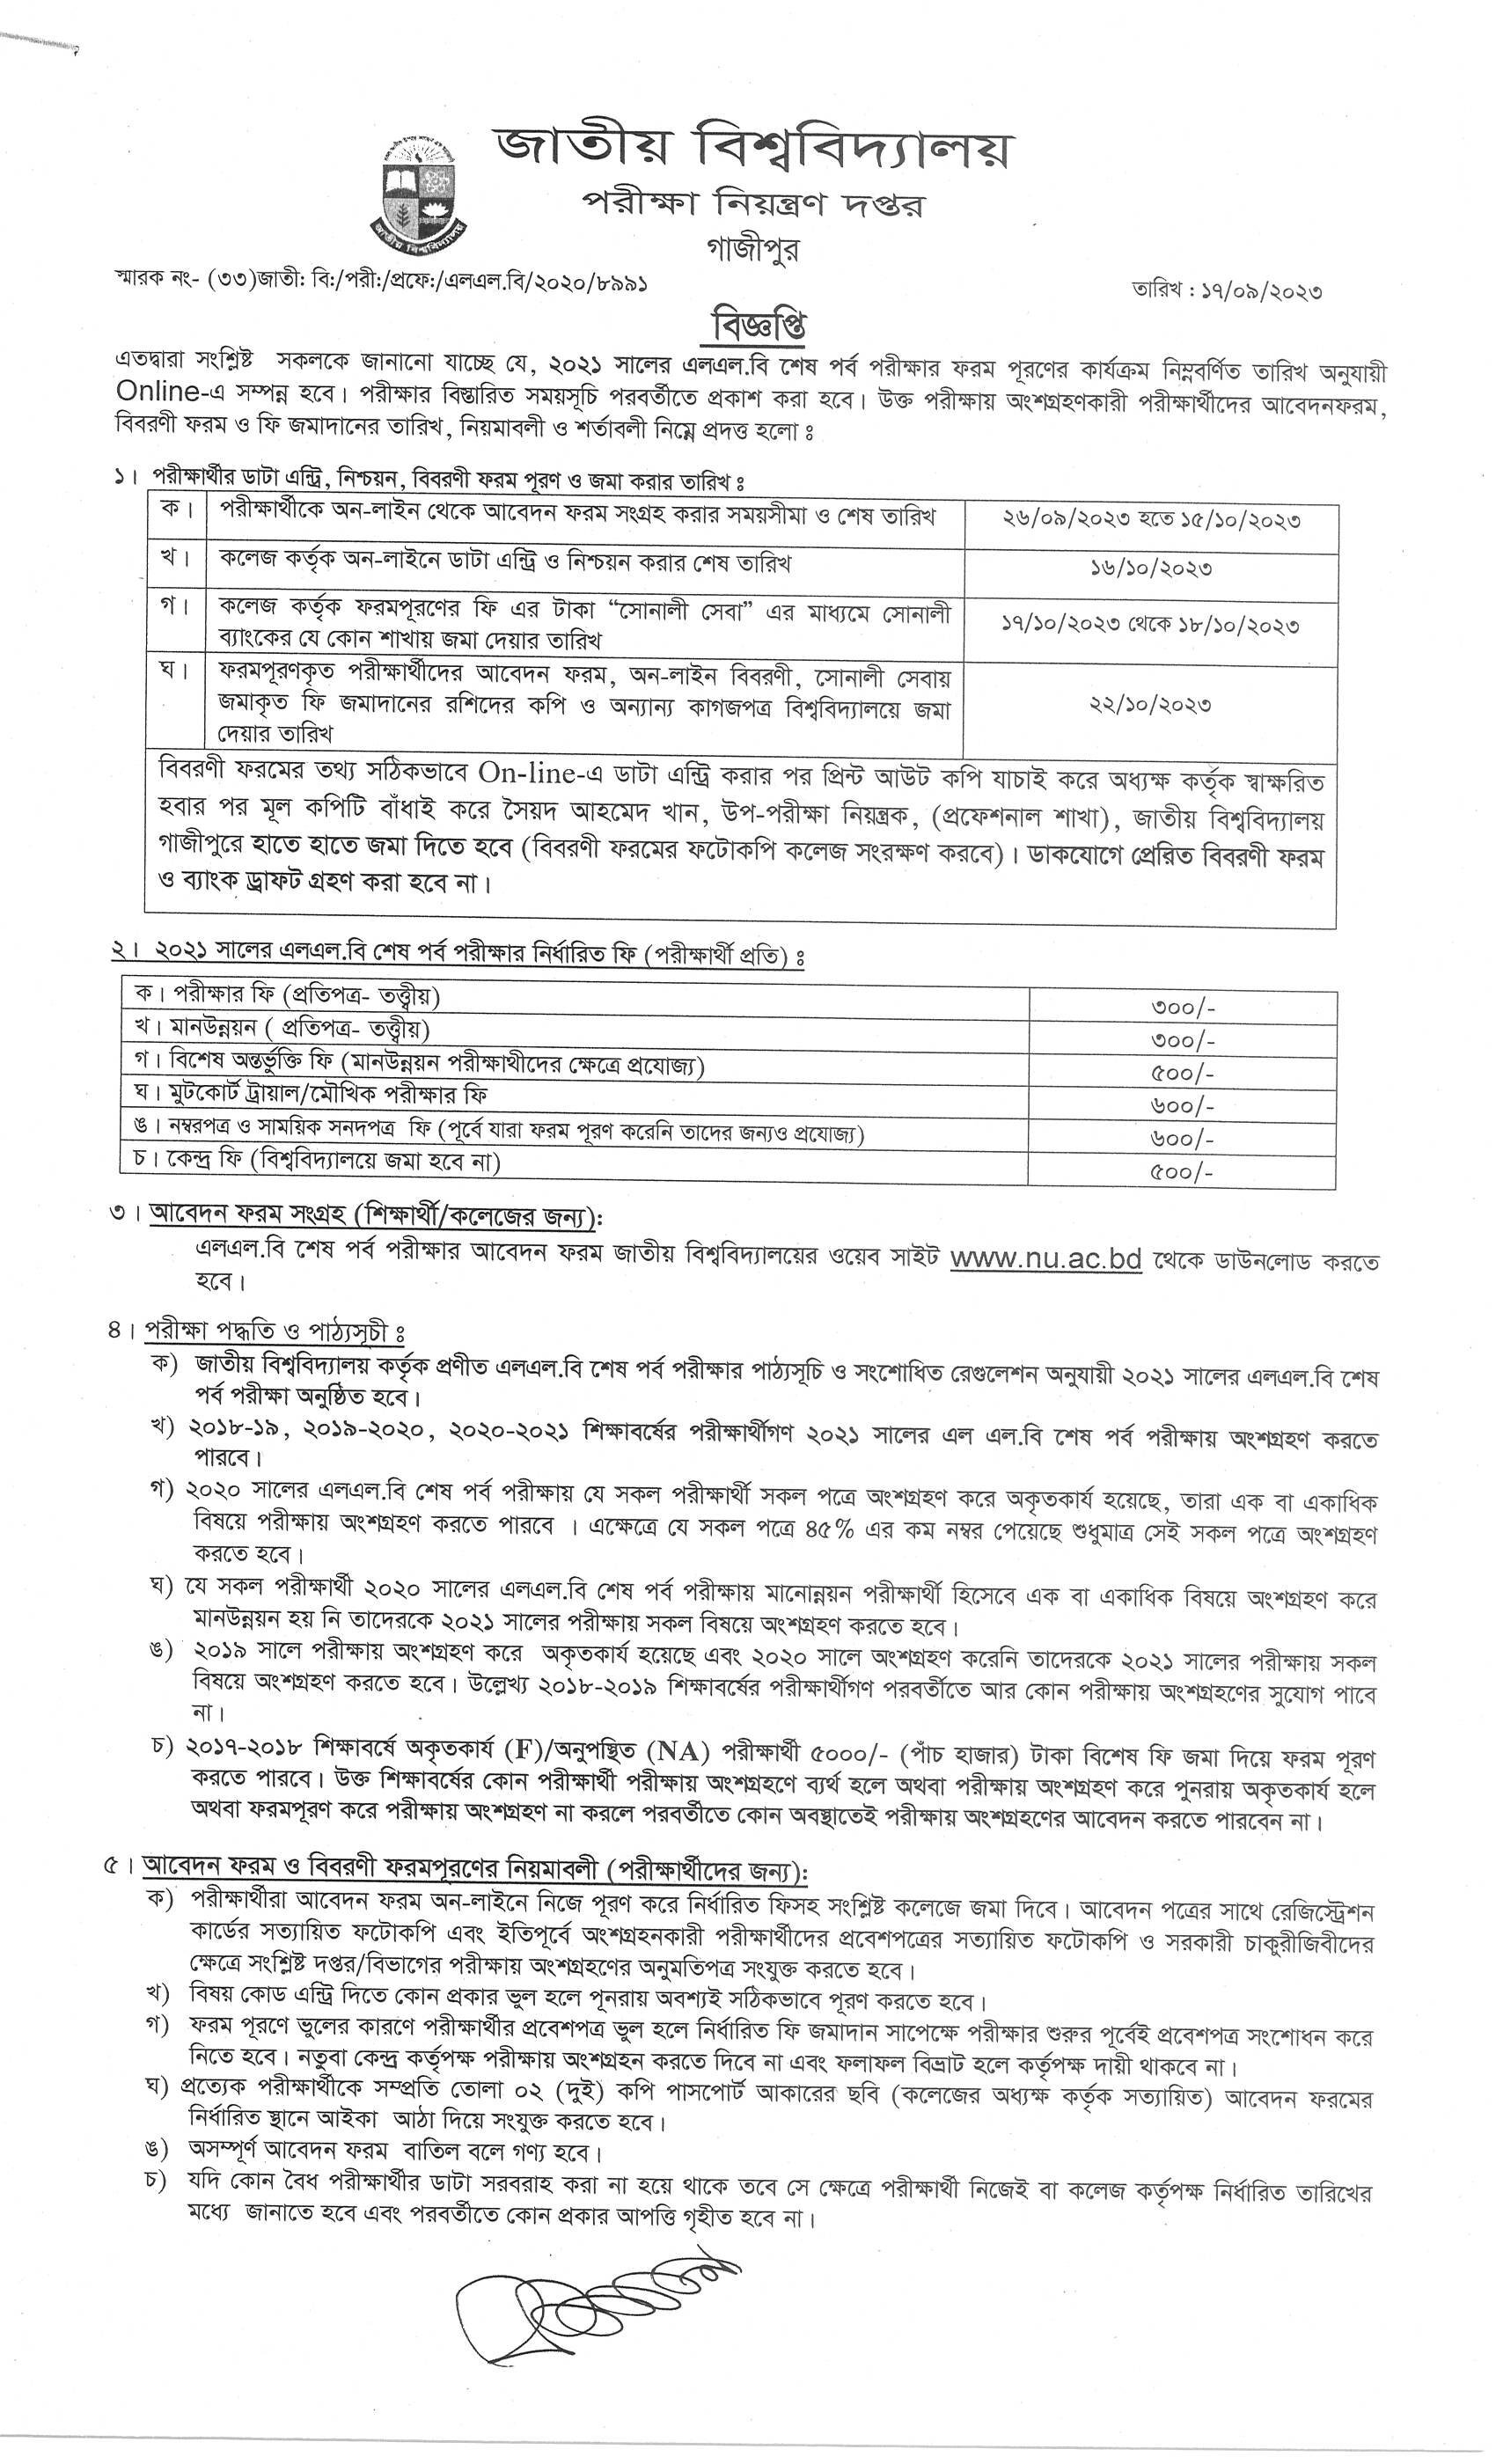 NU LLB Final Year Form Fill Up Notice